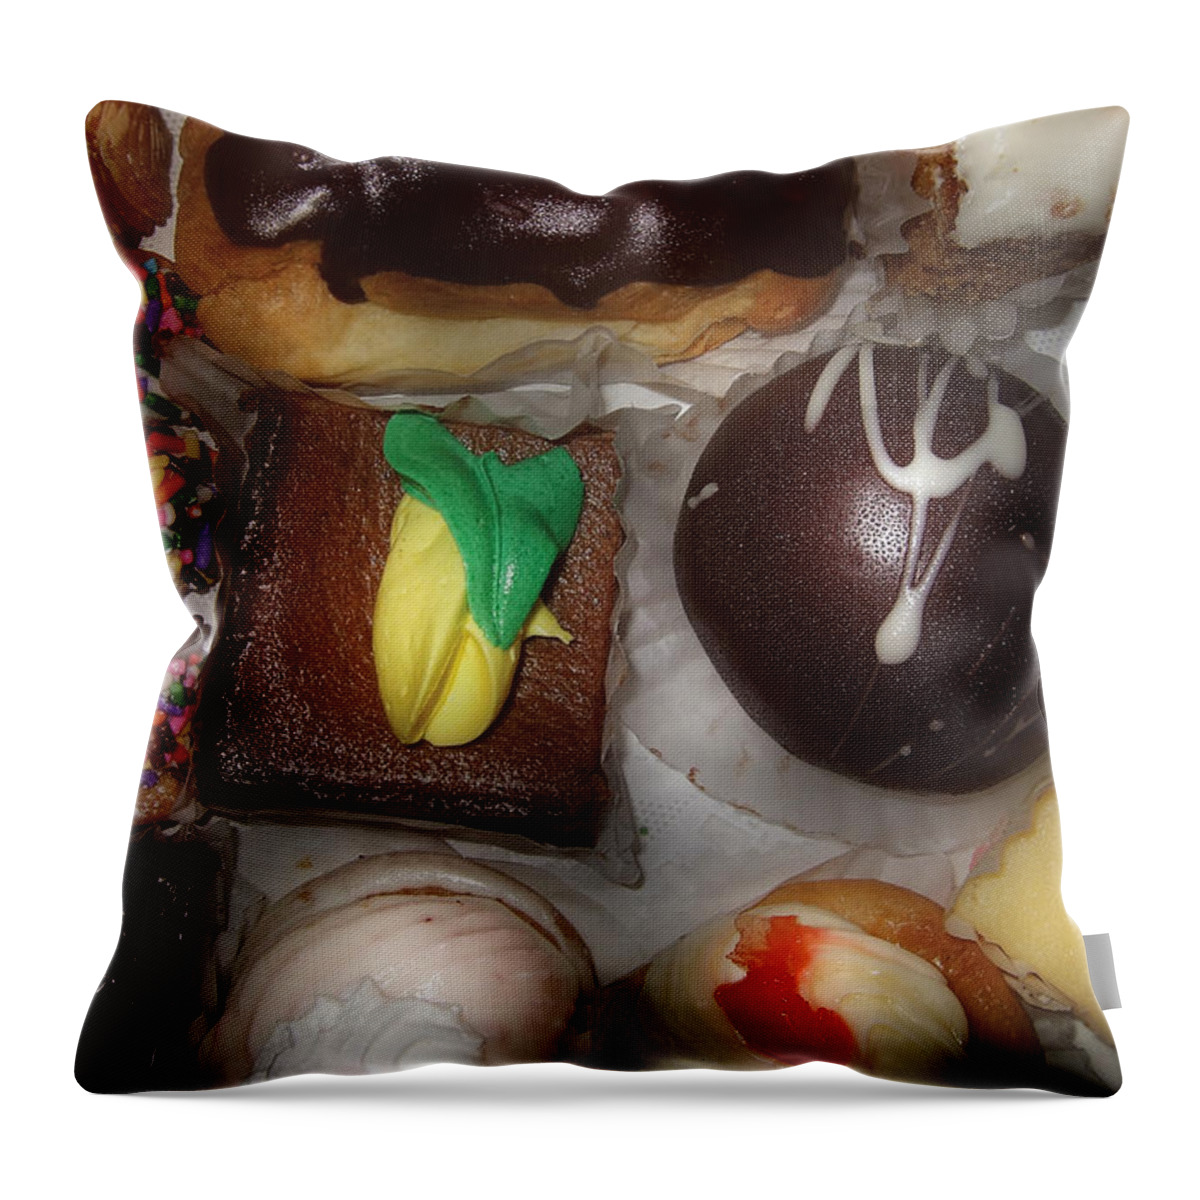 Candy Throw Pillow featuring the photograph Food - Candy - Oh Boy by Mike Savad